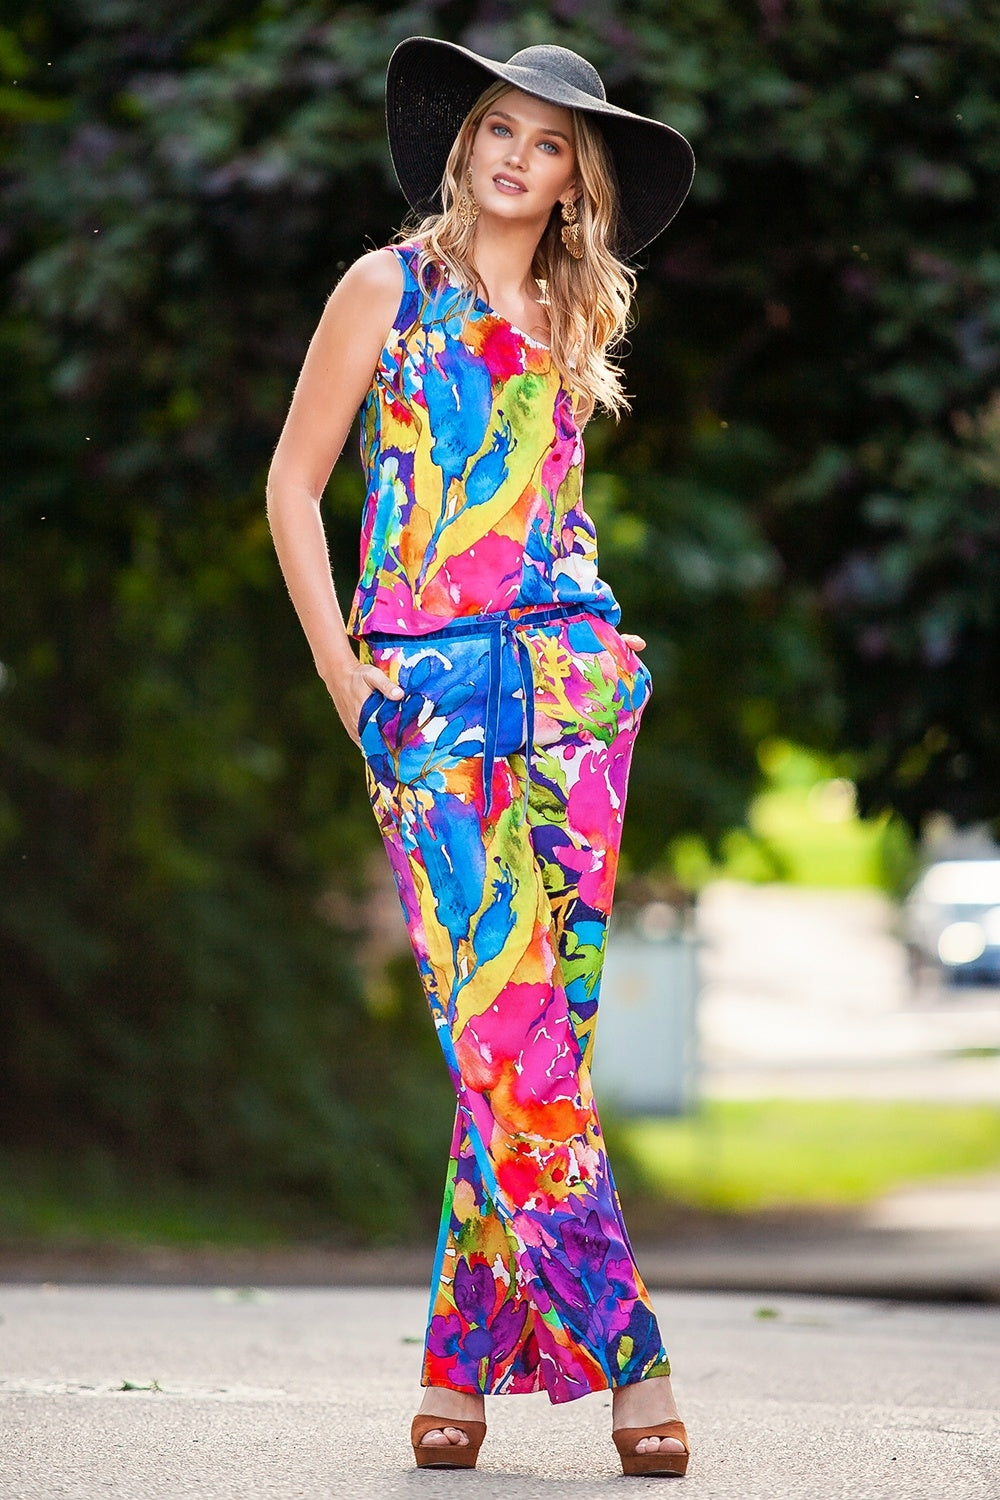 Sleeveless top with abstract bright print